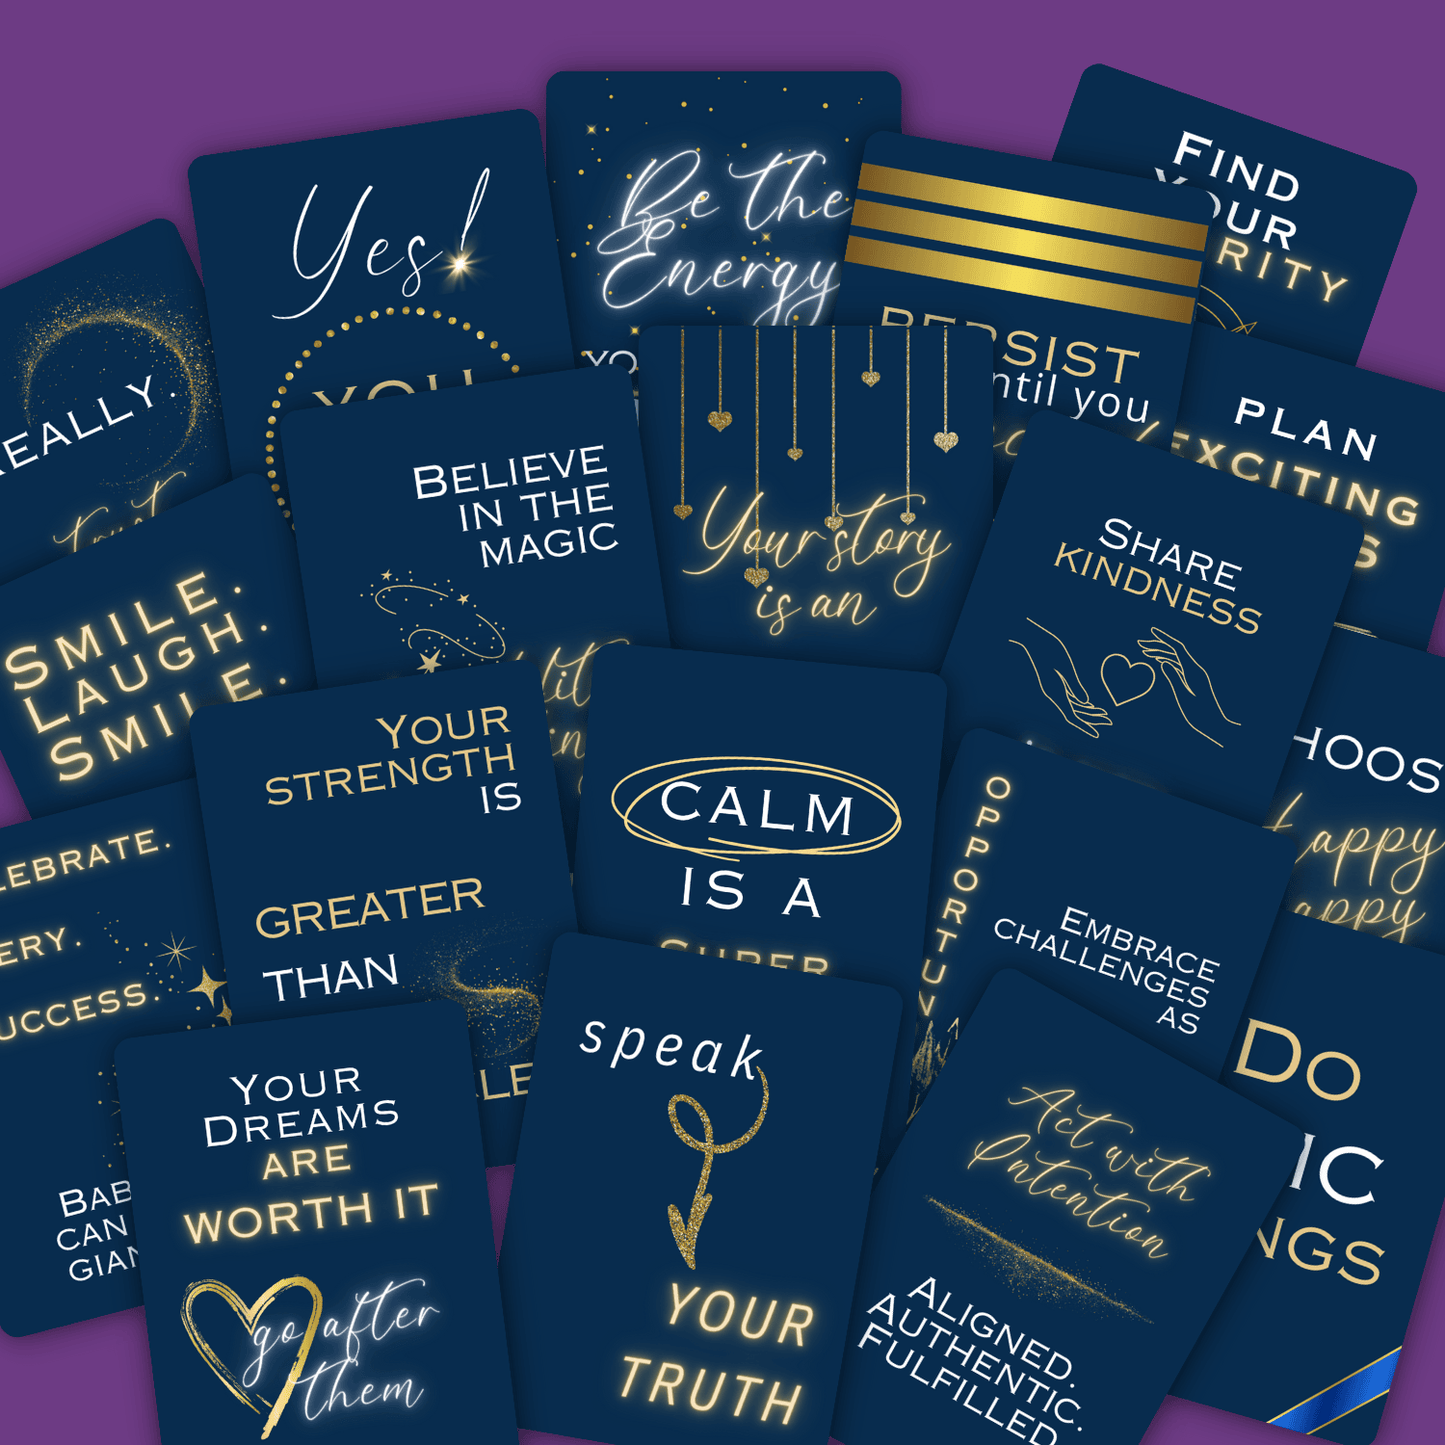 Title image is a spread of several cards from the Be Empowered Printable Card Deck in deep blue with white and gold foil letters and elements_by Patty Rose_Polka Dot Patty Shop